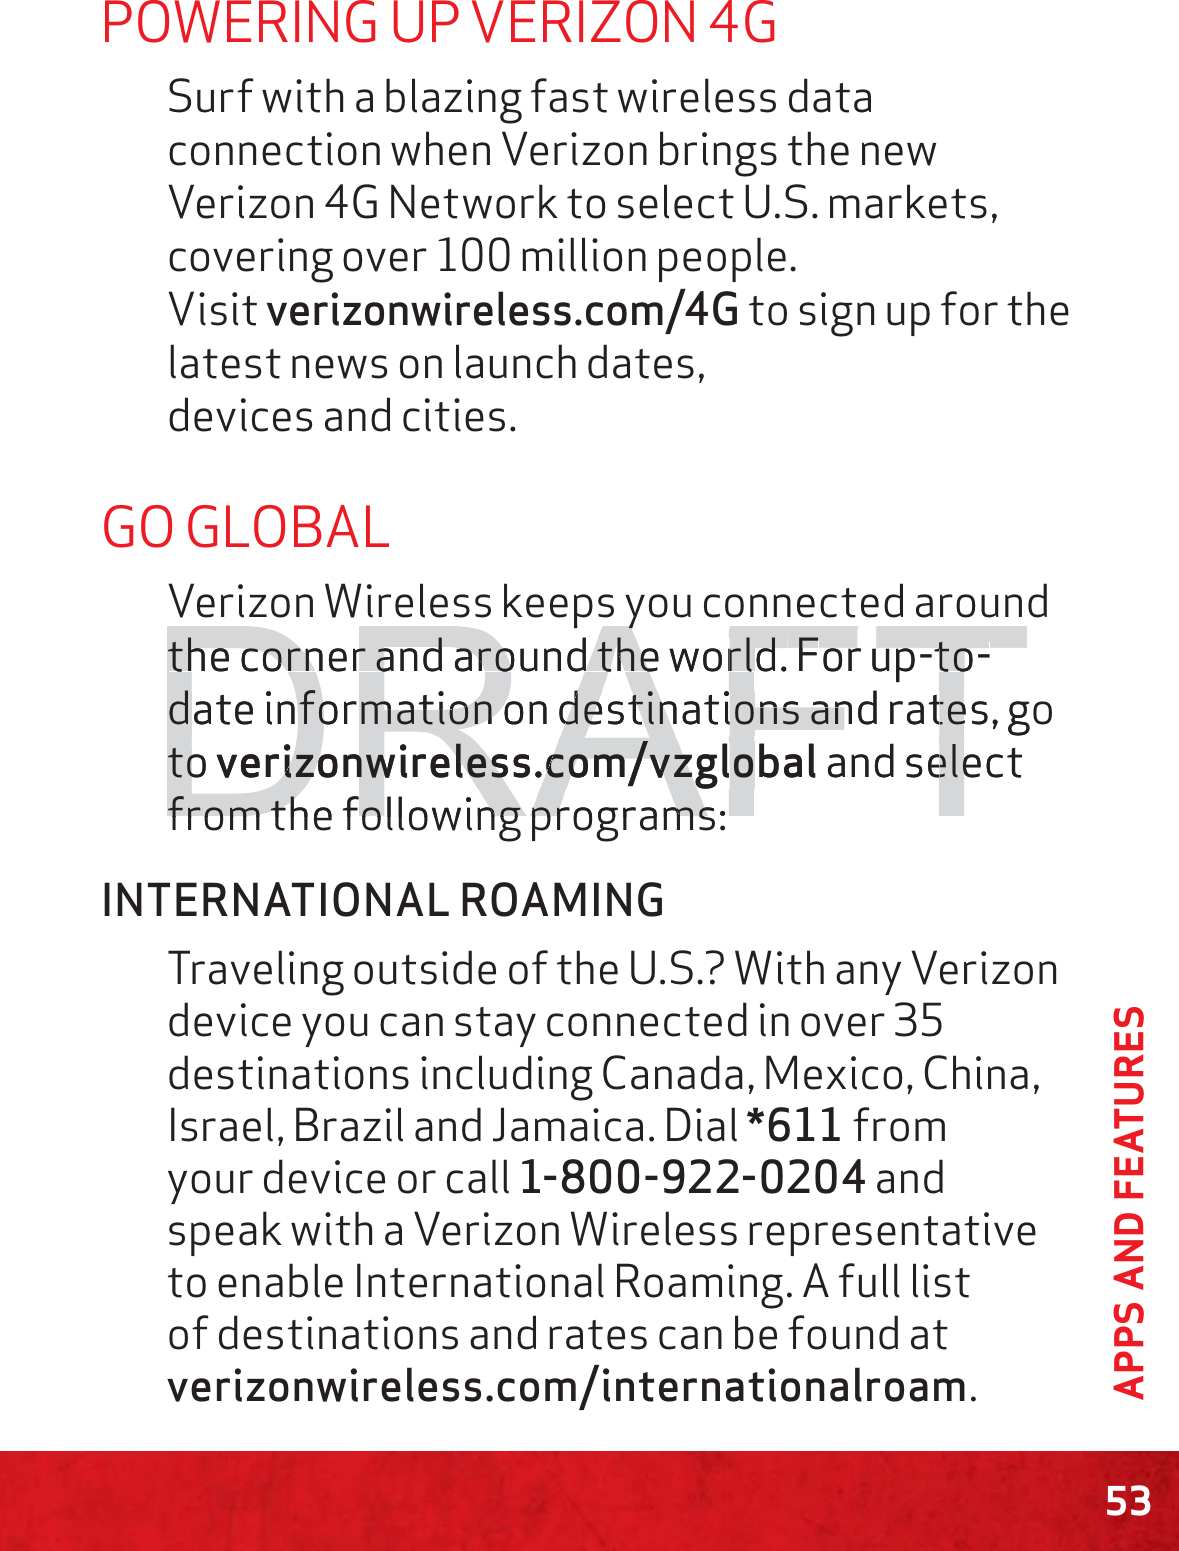 53APPS AND FEATURESPOWERING UP VERIZON 4GSurf with a blazing fast wireless data connection when Verizon brings the new Verizon 4G Network to select U.S. markets, covering over 100 million people.   Visit verizonwireless.com/4G to sign up for the latest news on launch dates,  devices and cities.GO GLOBALVerizon Wireless keeps you connected around the corner and around the world. For up-to-date information on destinations and rates, go to verizonwireless.com/vzglobal and select from the following programs:INTERNATIONAL ROAMINGTraveling outside of the U.S.? With any Verizon device you can stay connected in over 35 destinations including Canada, Mexico, China, Israel, Brazil and Jamaica. Dial *611 from your device or call 1-800-922-0204 and speak with a Verizon Wireless representative to enable International Roaming. A full list of destinations and rates can be found at verizonwireless.com/internationalroam.DRAFTpypythe corner and around the world. the corner and around the world. FFor up-to--to-date information on destinations and rates, gdate information on destinations and ratetotoverizonwireless.com/vzglobalrizonwireless.com/vzglo and select elefrom the following programs:from the following programs